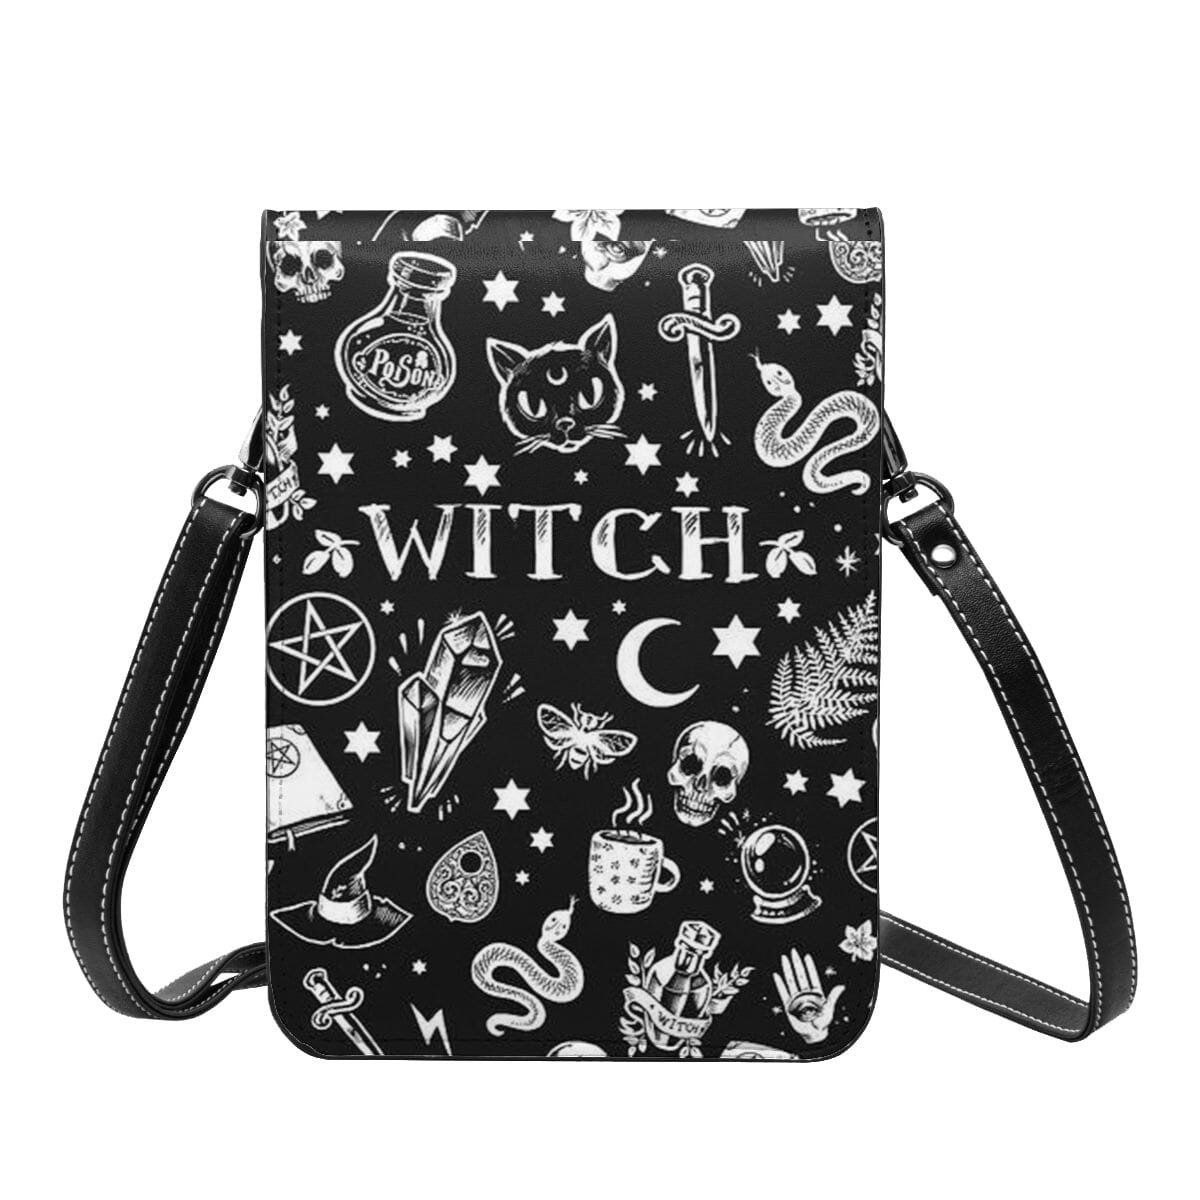 Witch Crossbody Bag The Store Bags 